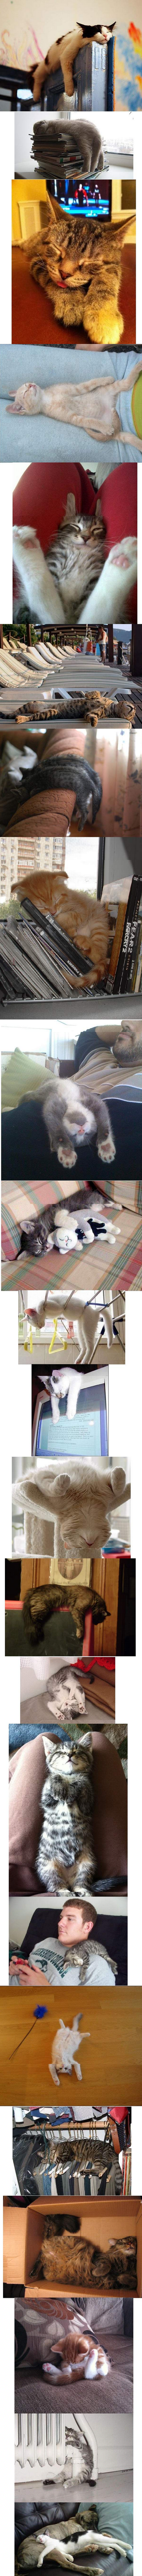 cats sleeping positions2